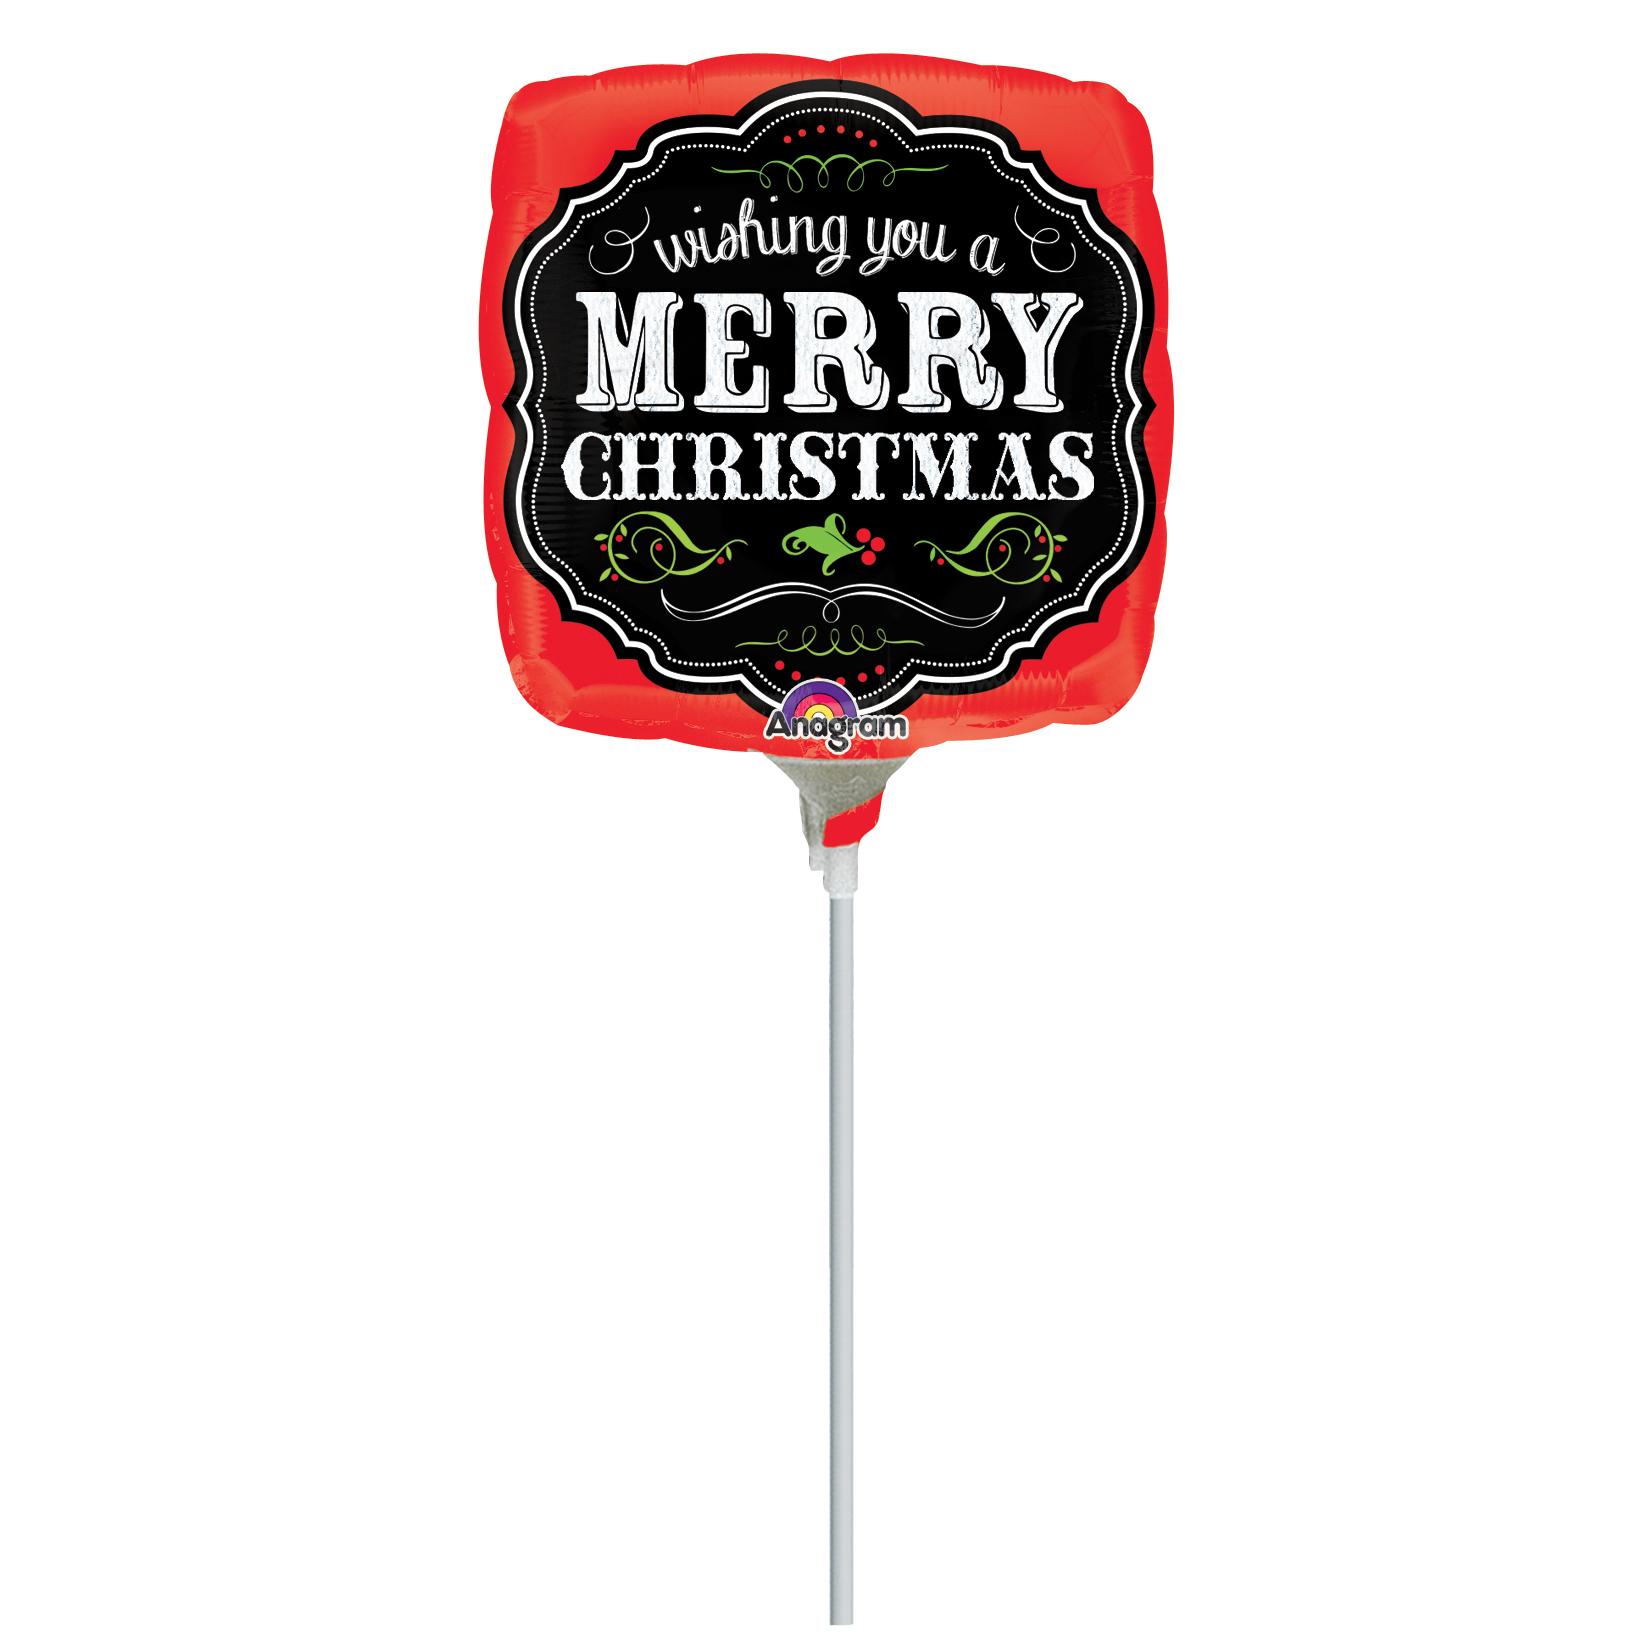 Merry Christmas Chalkboard Square Foil Balloon Balloons & Streamers - Party Centre